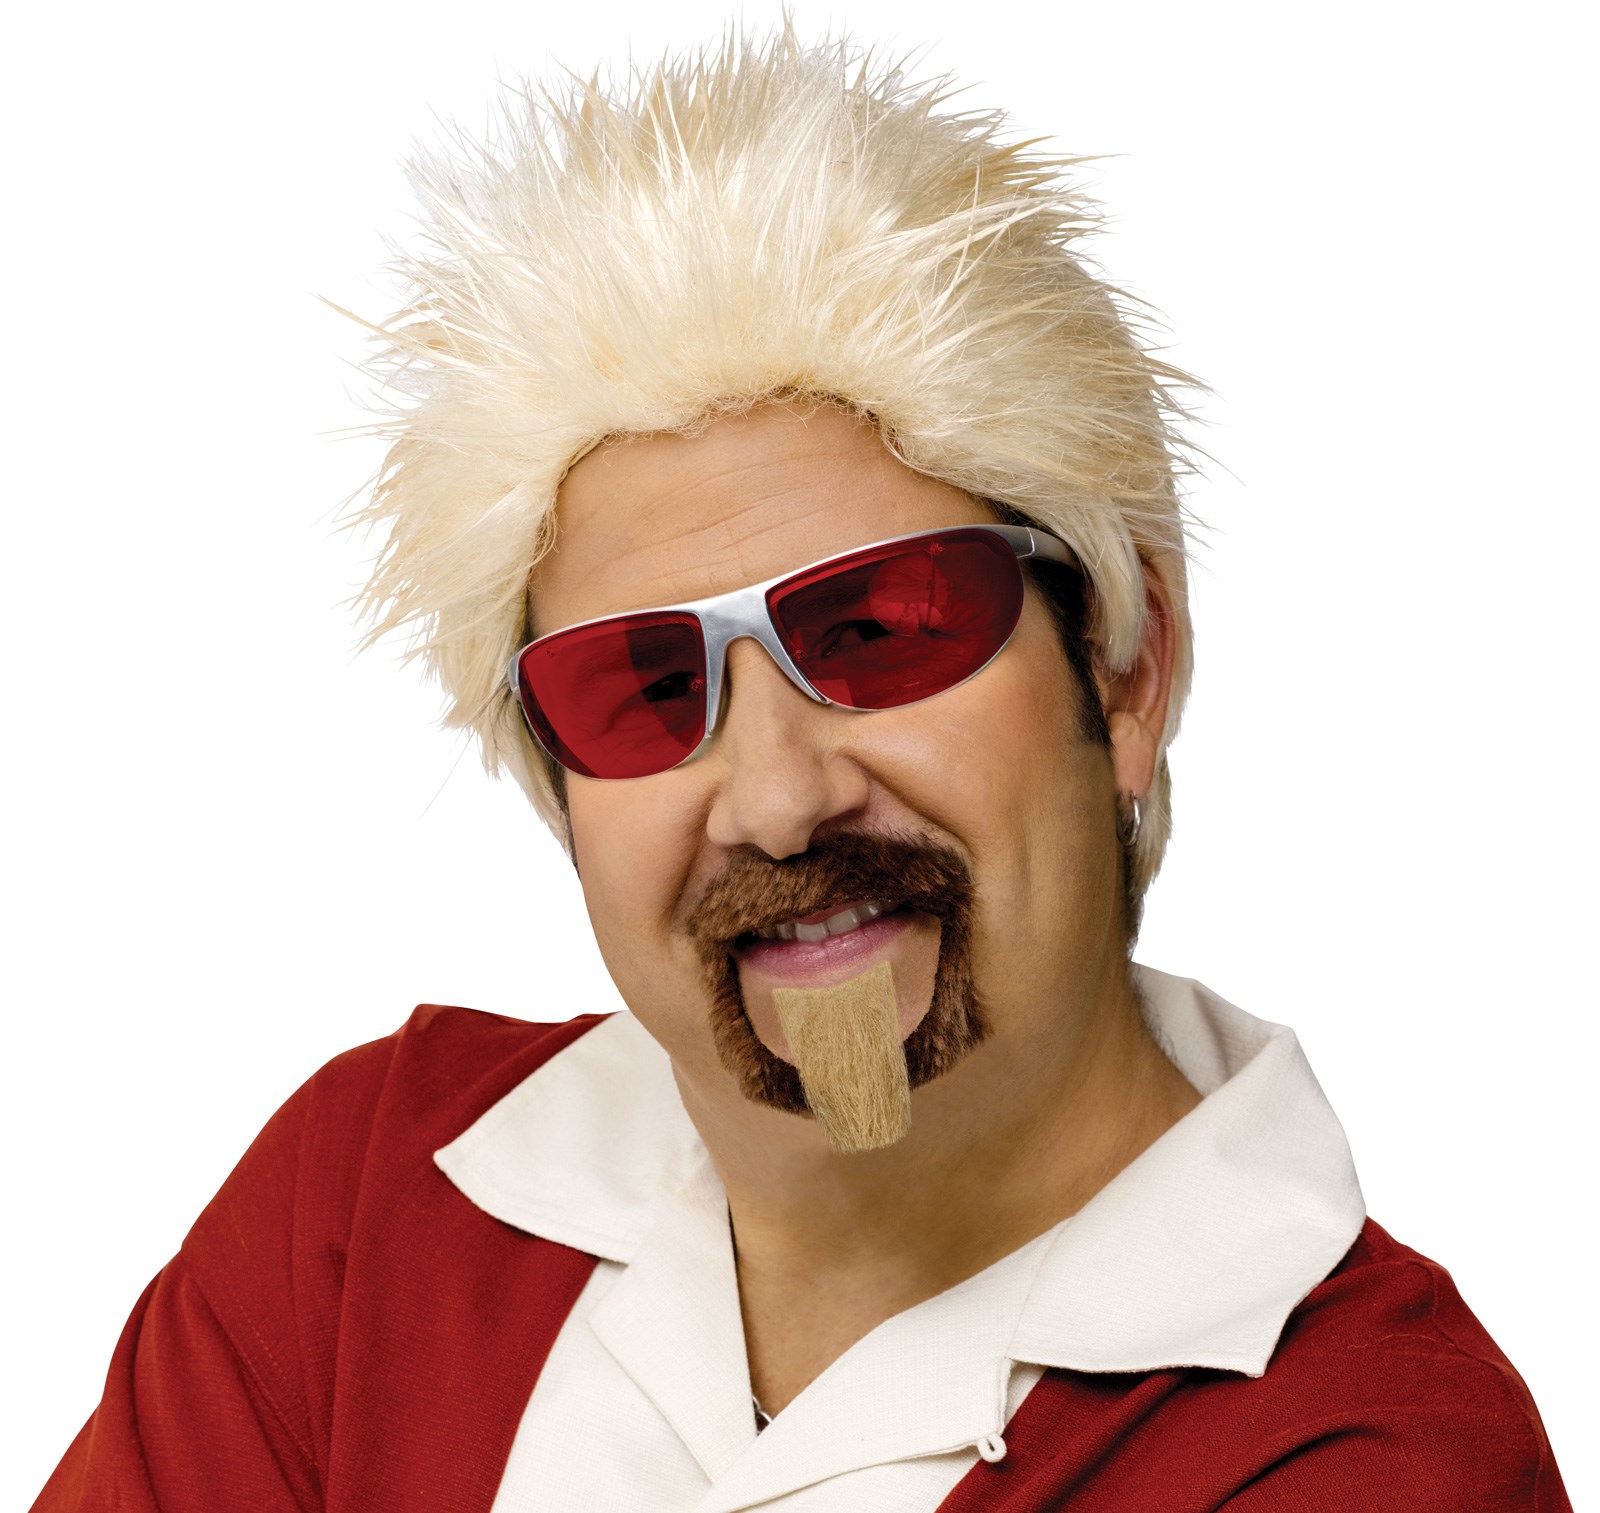 Celebrity Chef Wig and Goatee